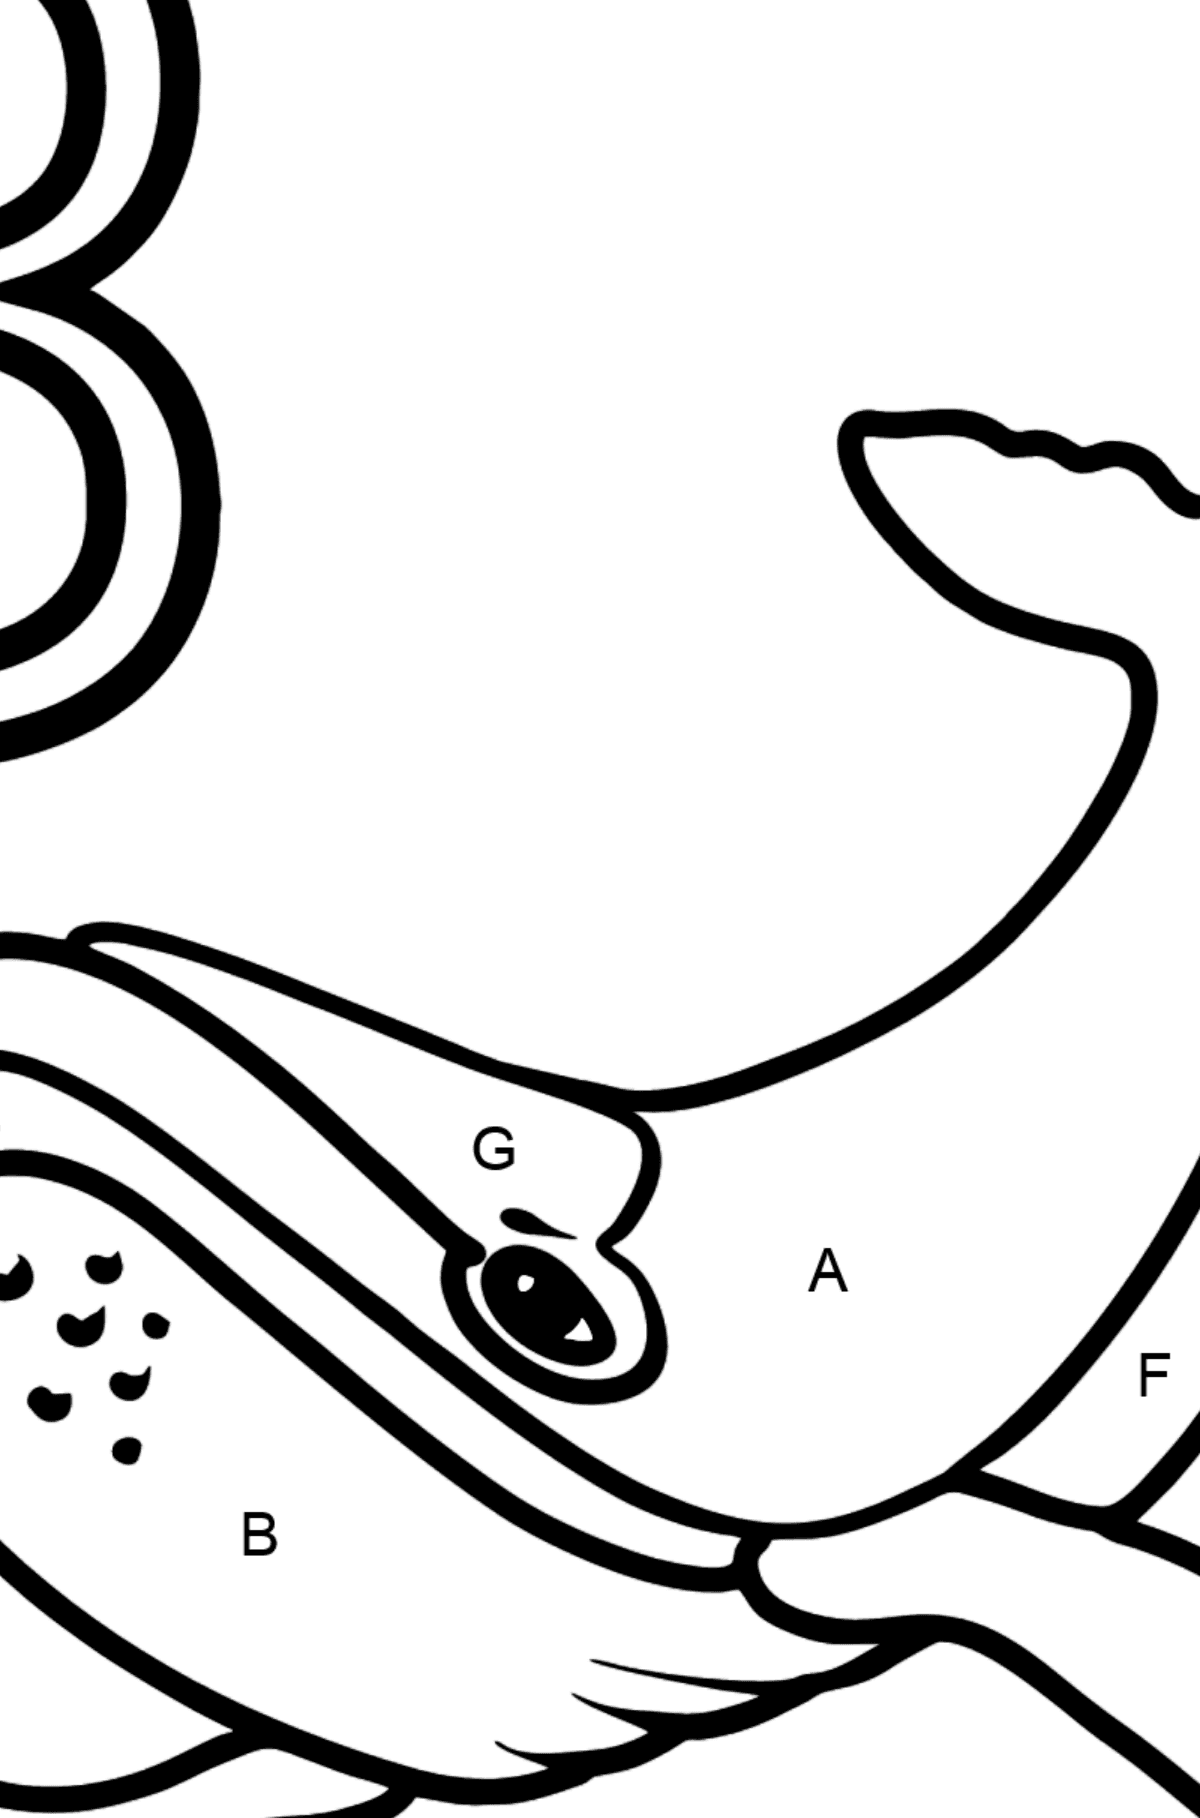 Spanish Letter B coloring pages - BALLENA - Coloring by Letters for Kids